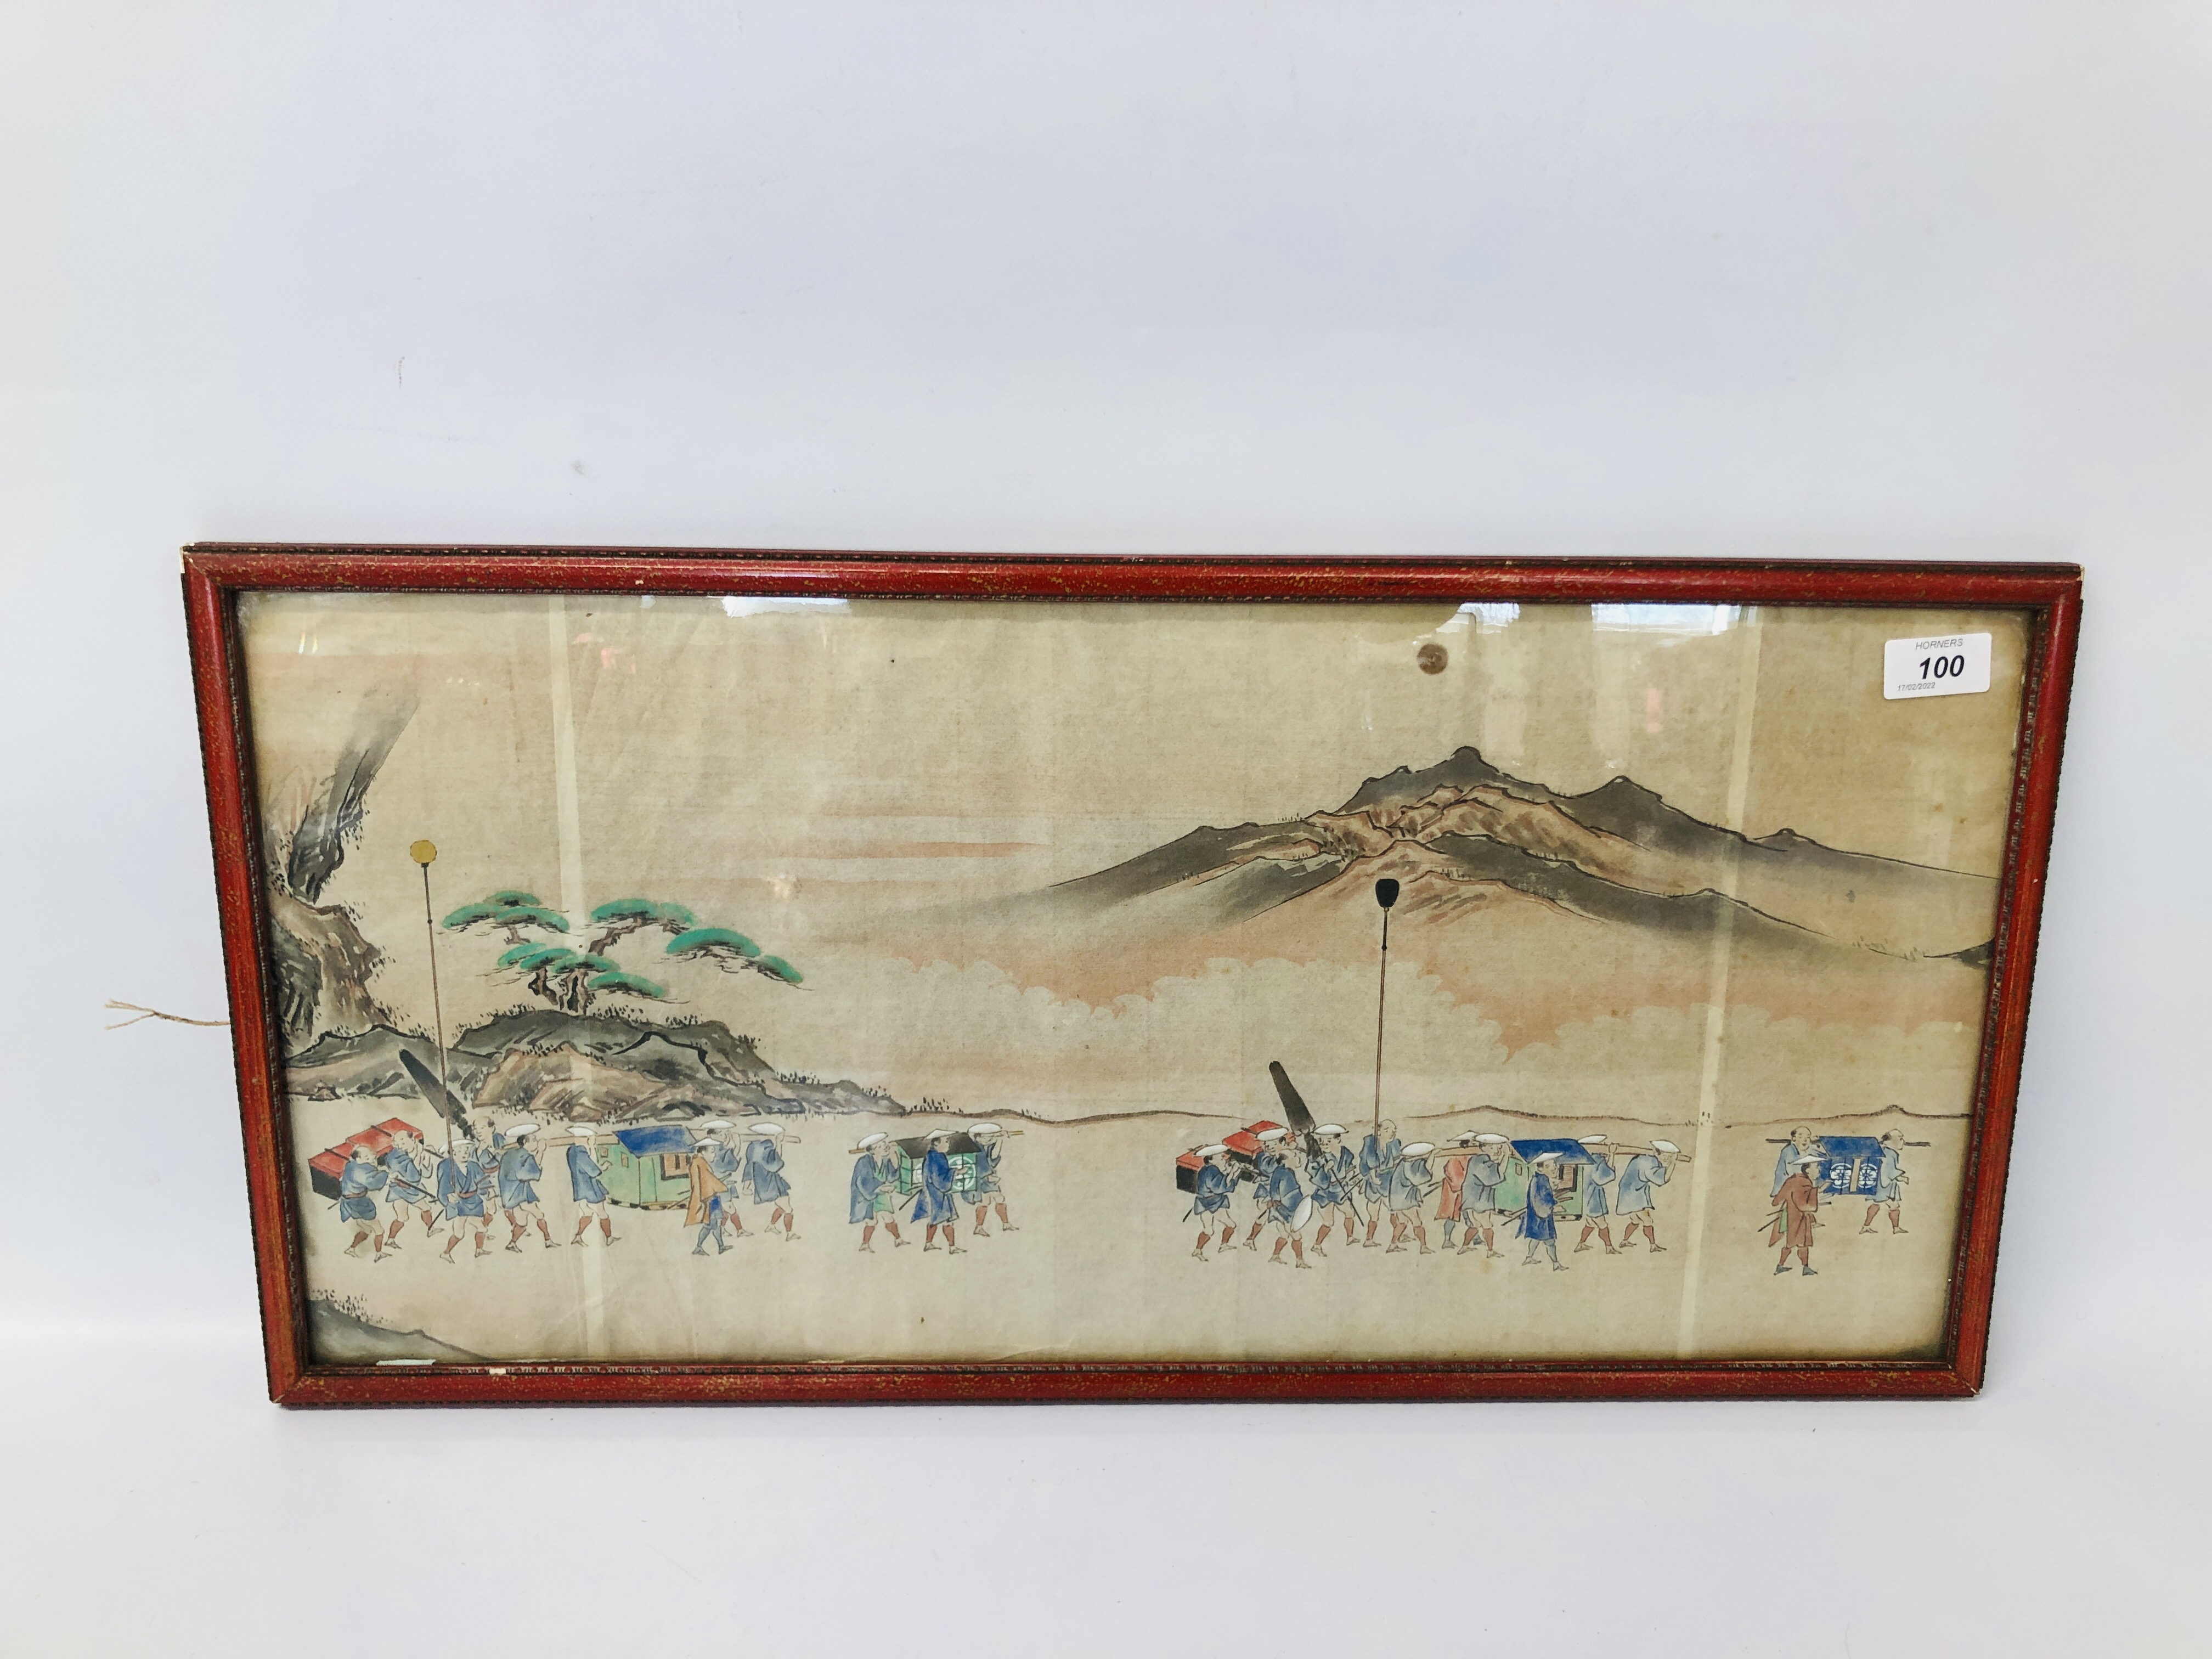 AN EARLY C20TH JAPANESE DRAWING OF FIGURES ON EXPEDITION IN MOUNTAINOUS LANDSCAPE 29CM X 63CM - THE